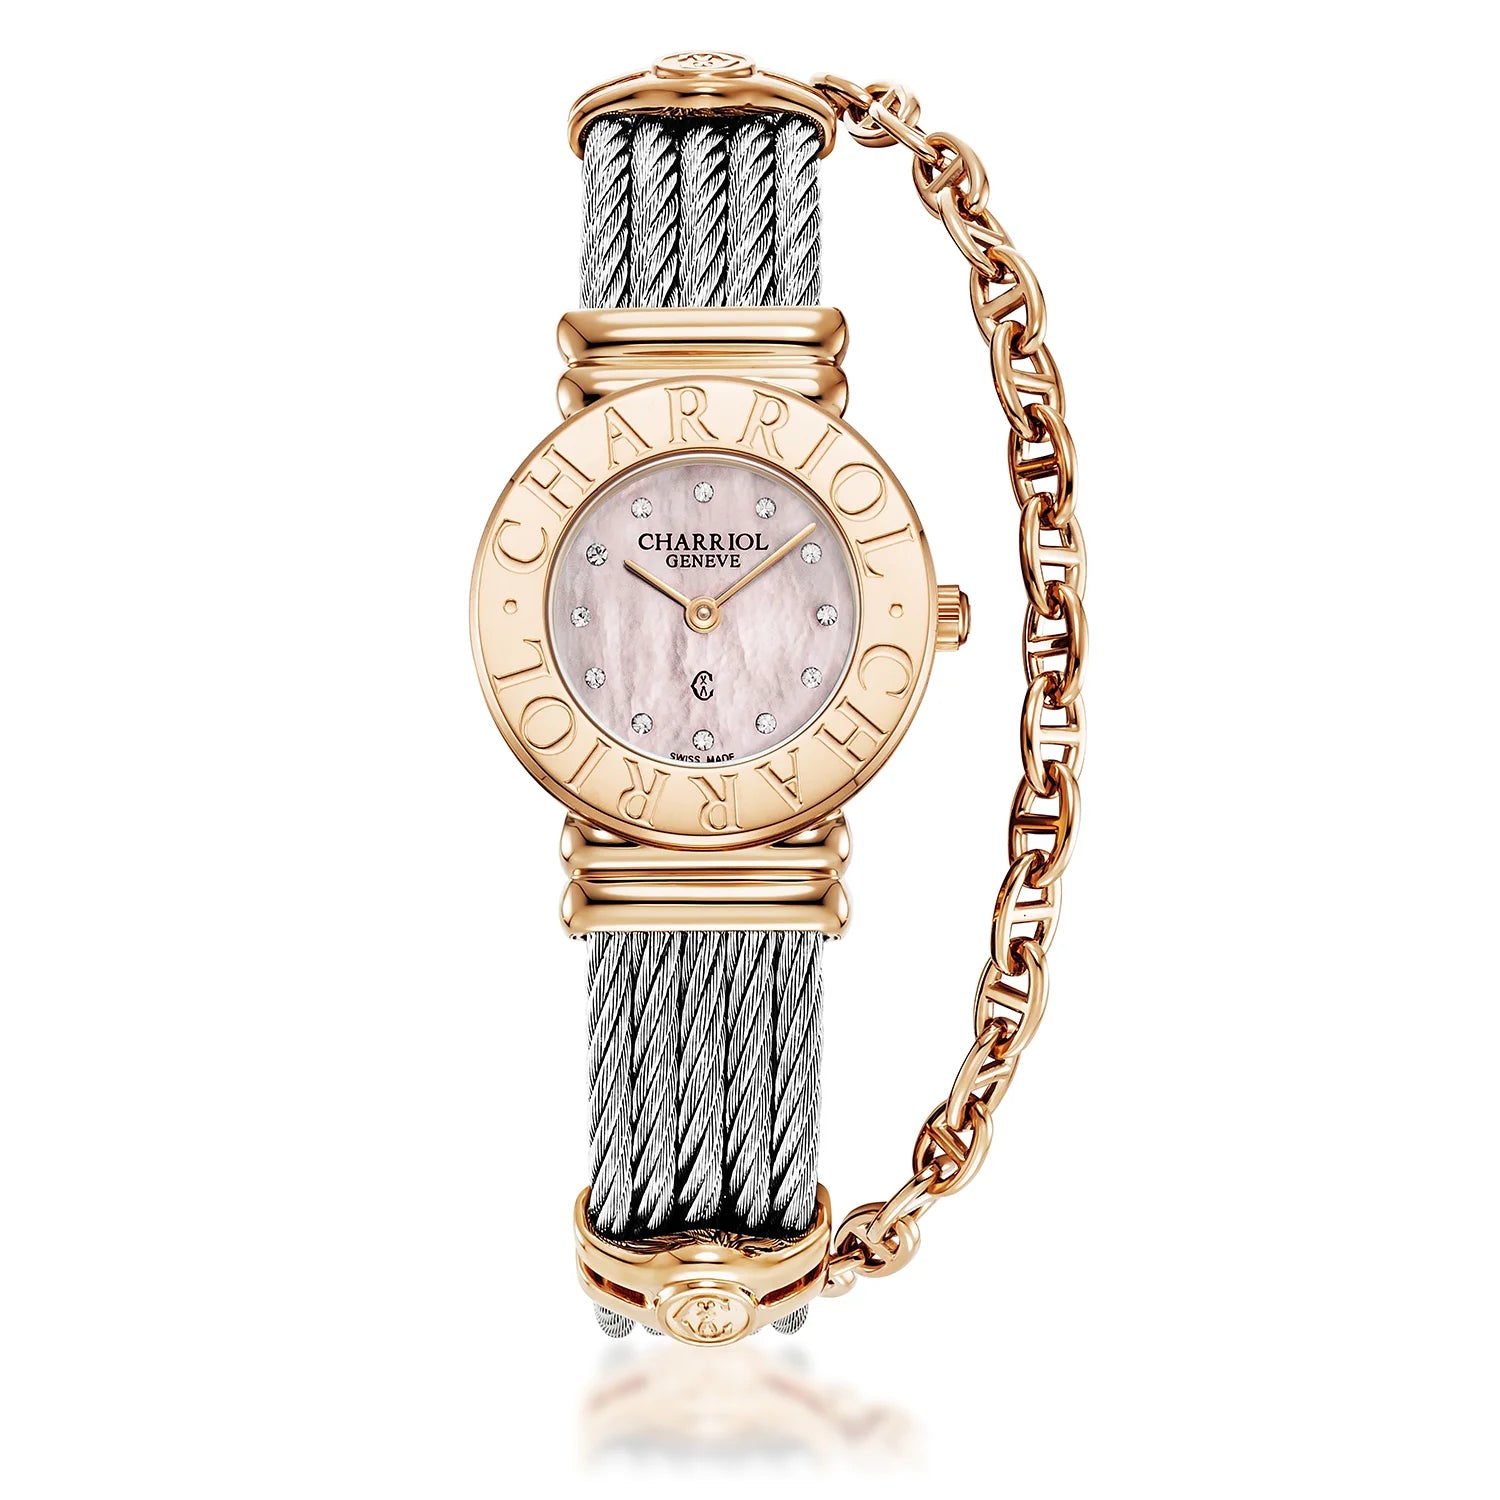 St Tropez Icon 24.5mm Watch Rose Gold PVD, Steel Cable, Charriol Bezel and 12 Diamonds Pink MOP Dial - Charriol Geneve -  Watch